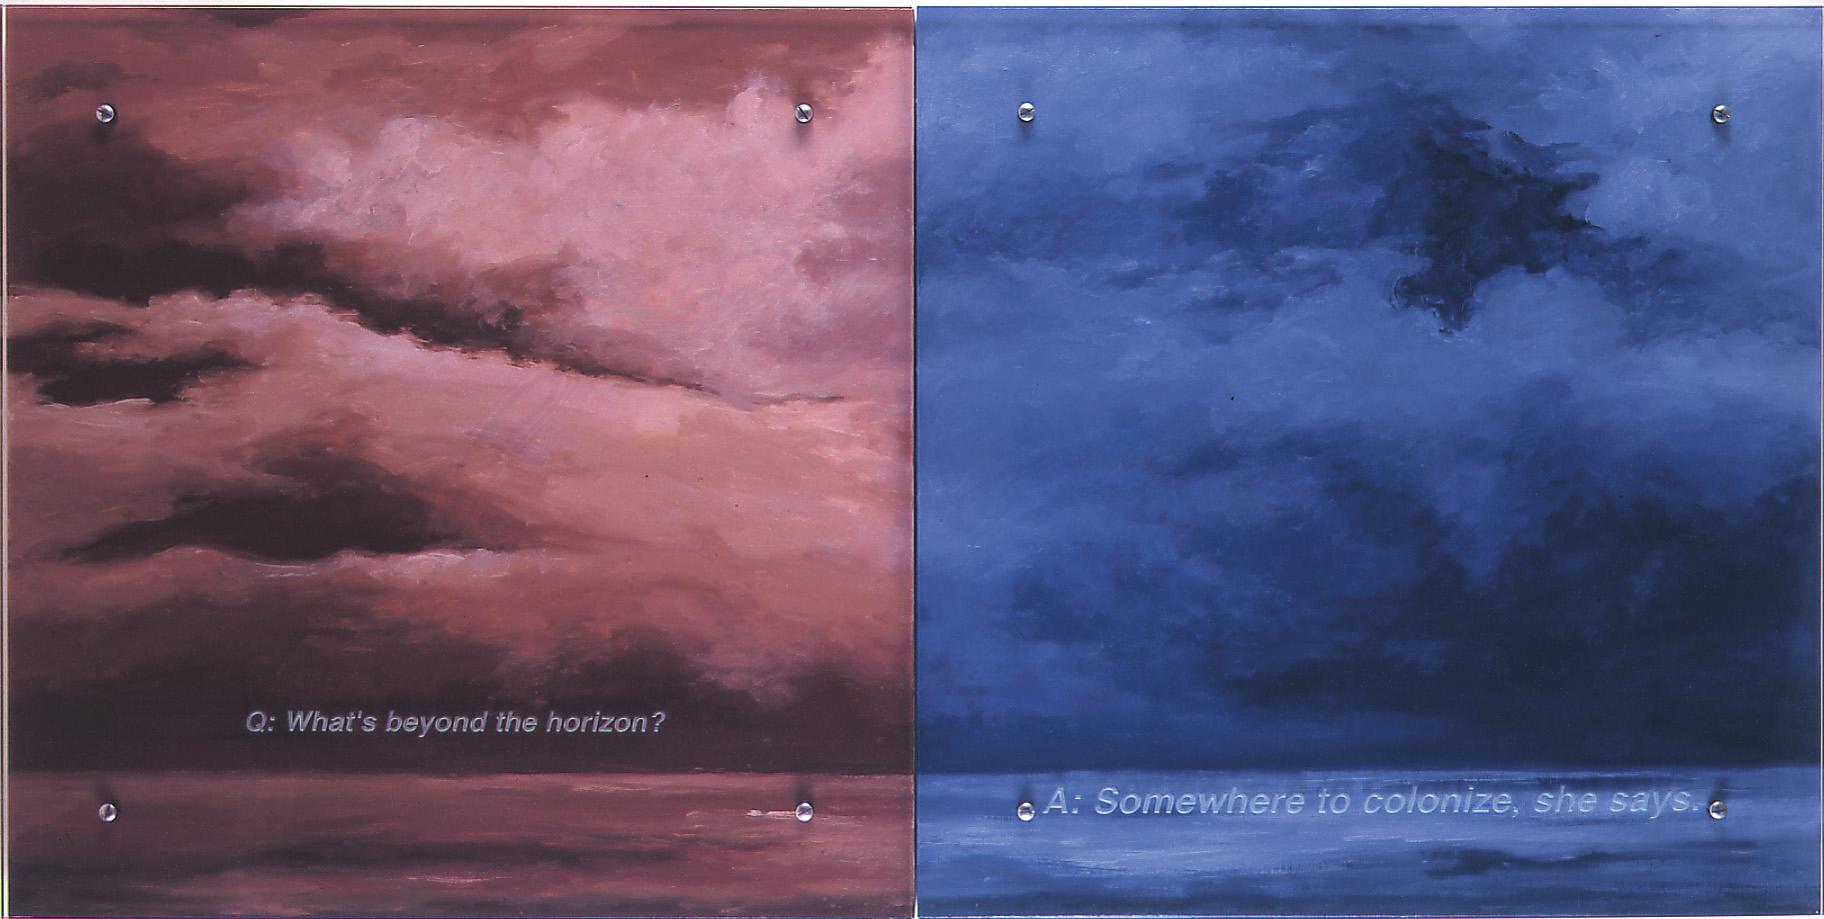 What's beyond the horizon?, 2000 60" x 30" (153cm x 76.5cm), oil/wood, sandblasted glass, bolts After Gustave Courbet, L'Immensite, V&A, London Text: What's beyond the horizon? A: Somewhere to colonize, she says.